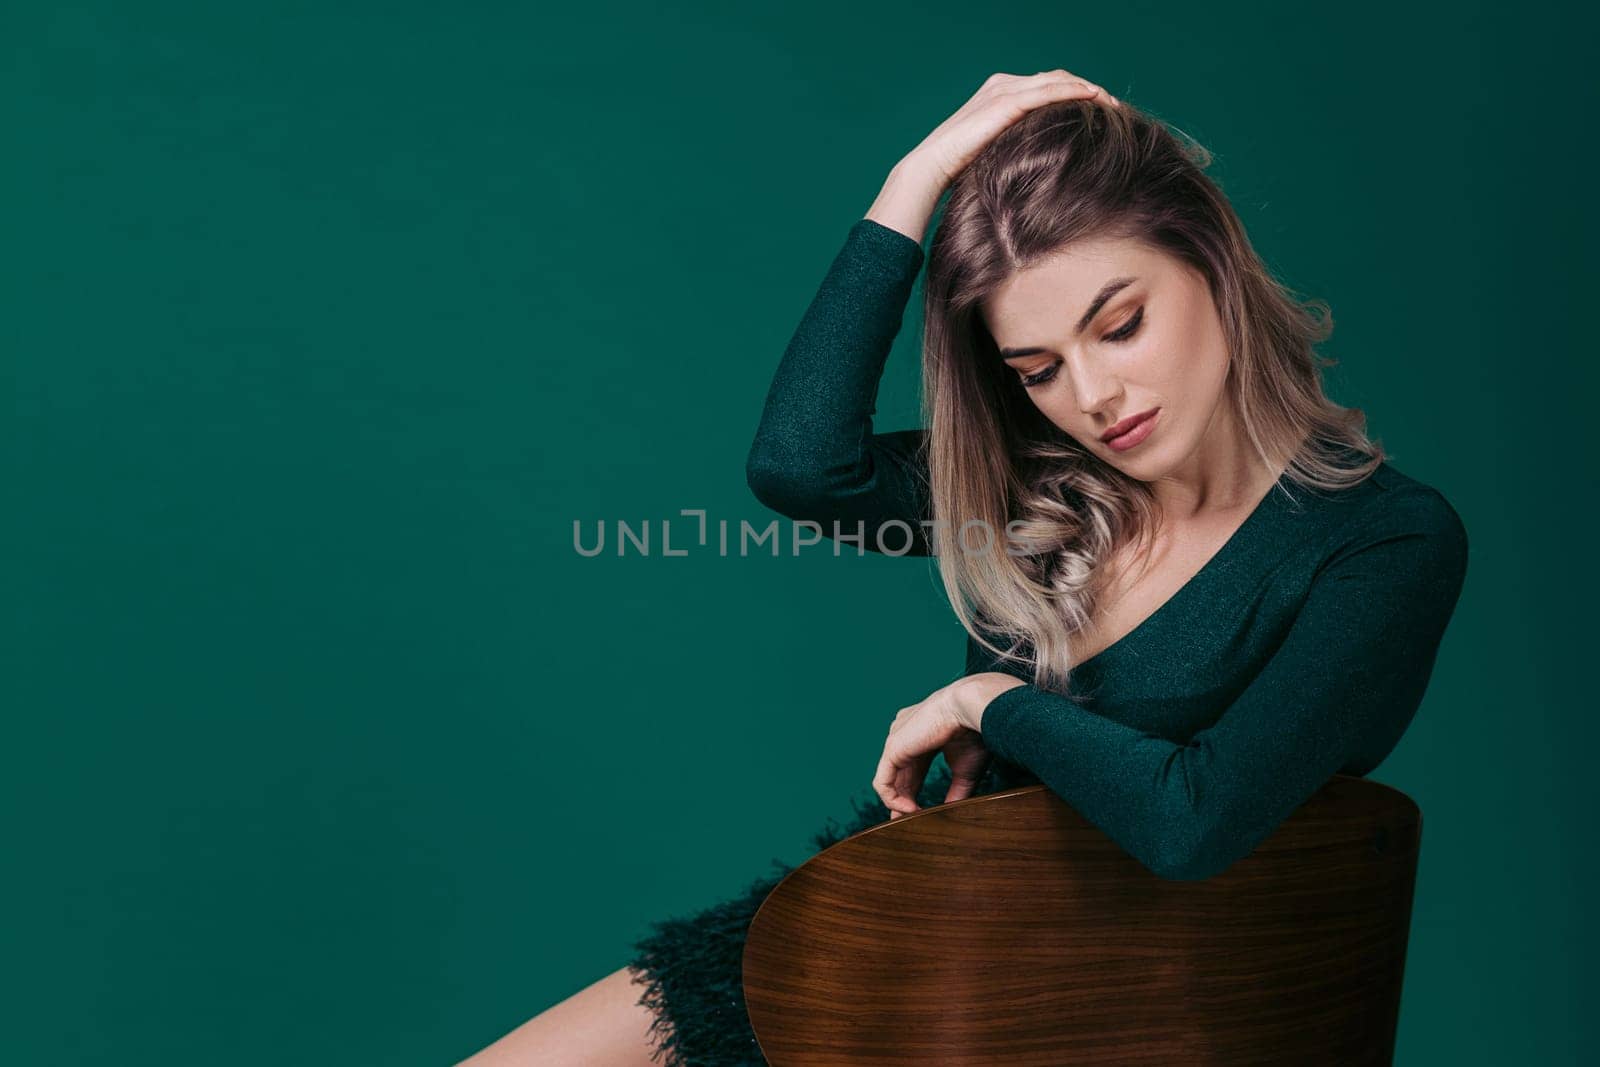 Sensual beautiful blonde woman in green dress sitting on chair against green background